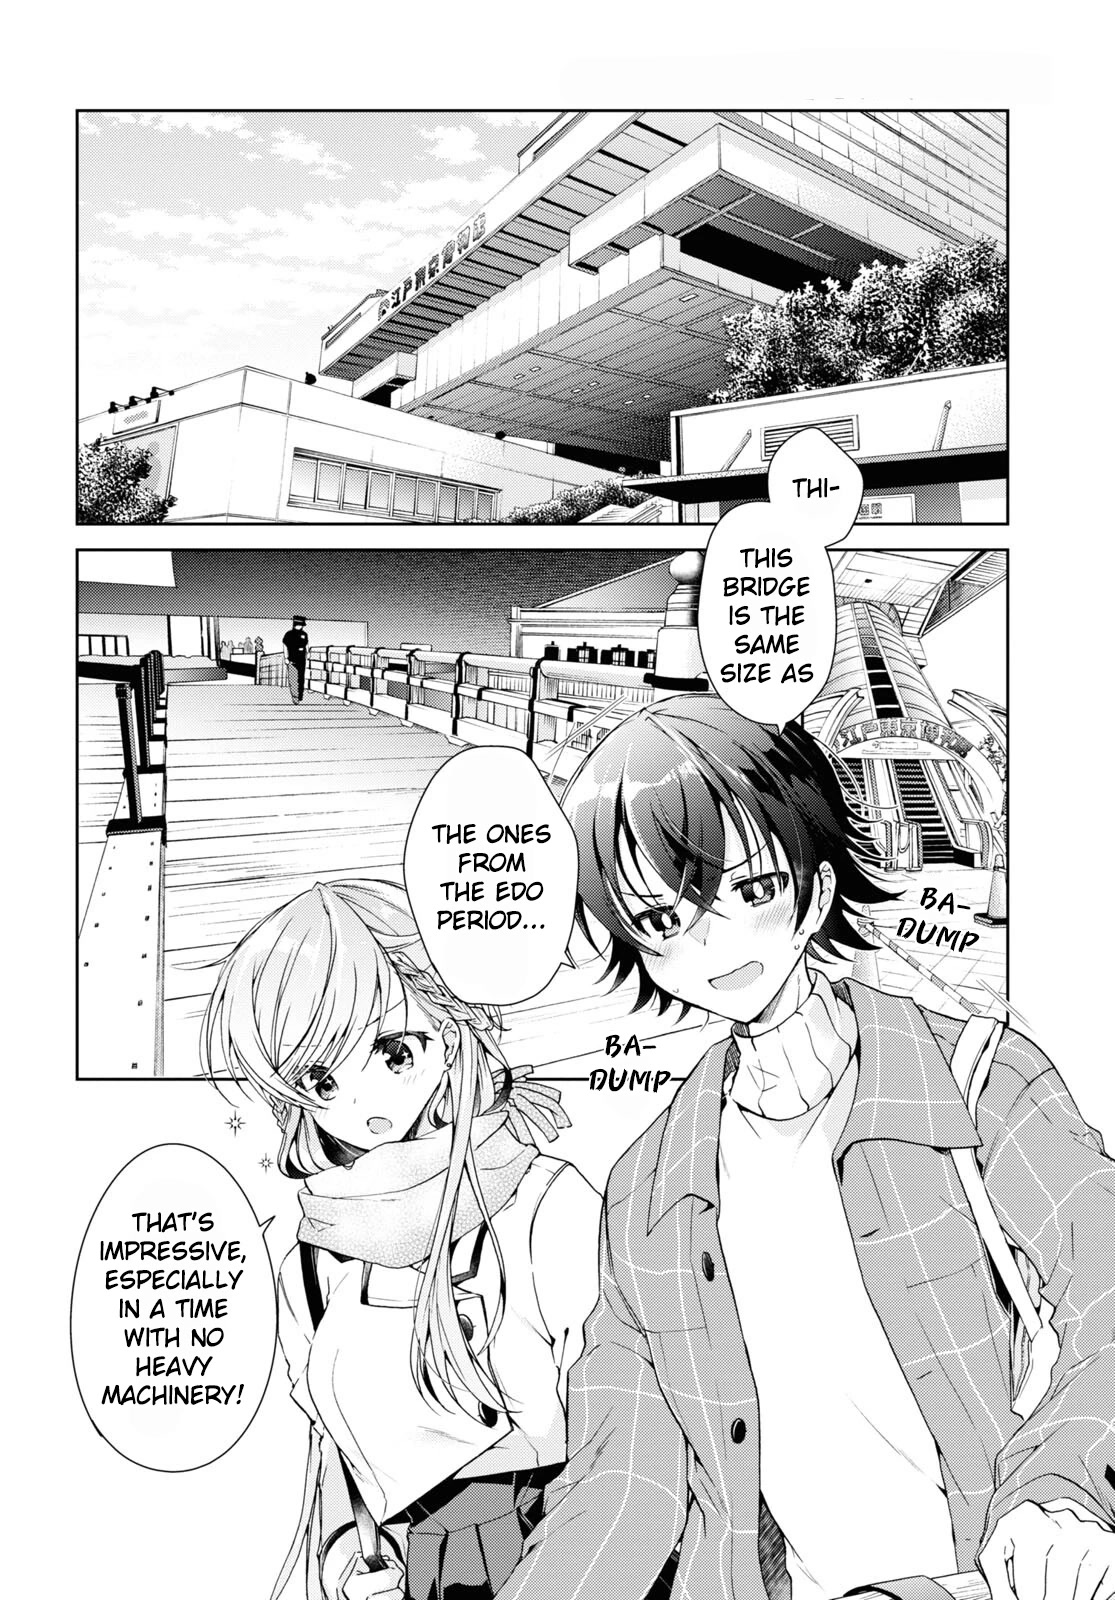 Isshiki-san Wants to Know About Love. - chapter 16 - #4